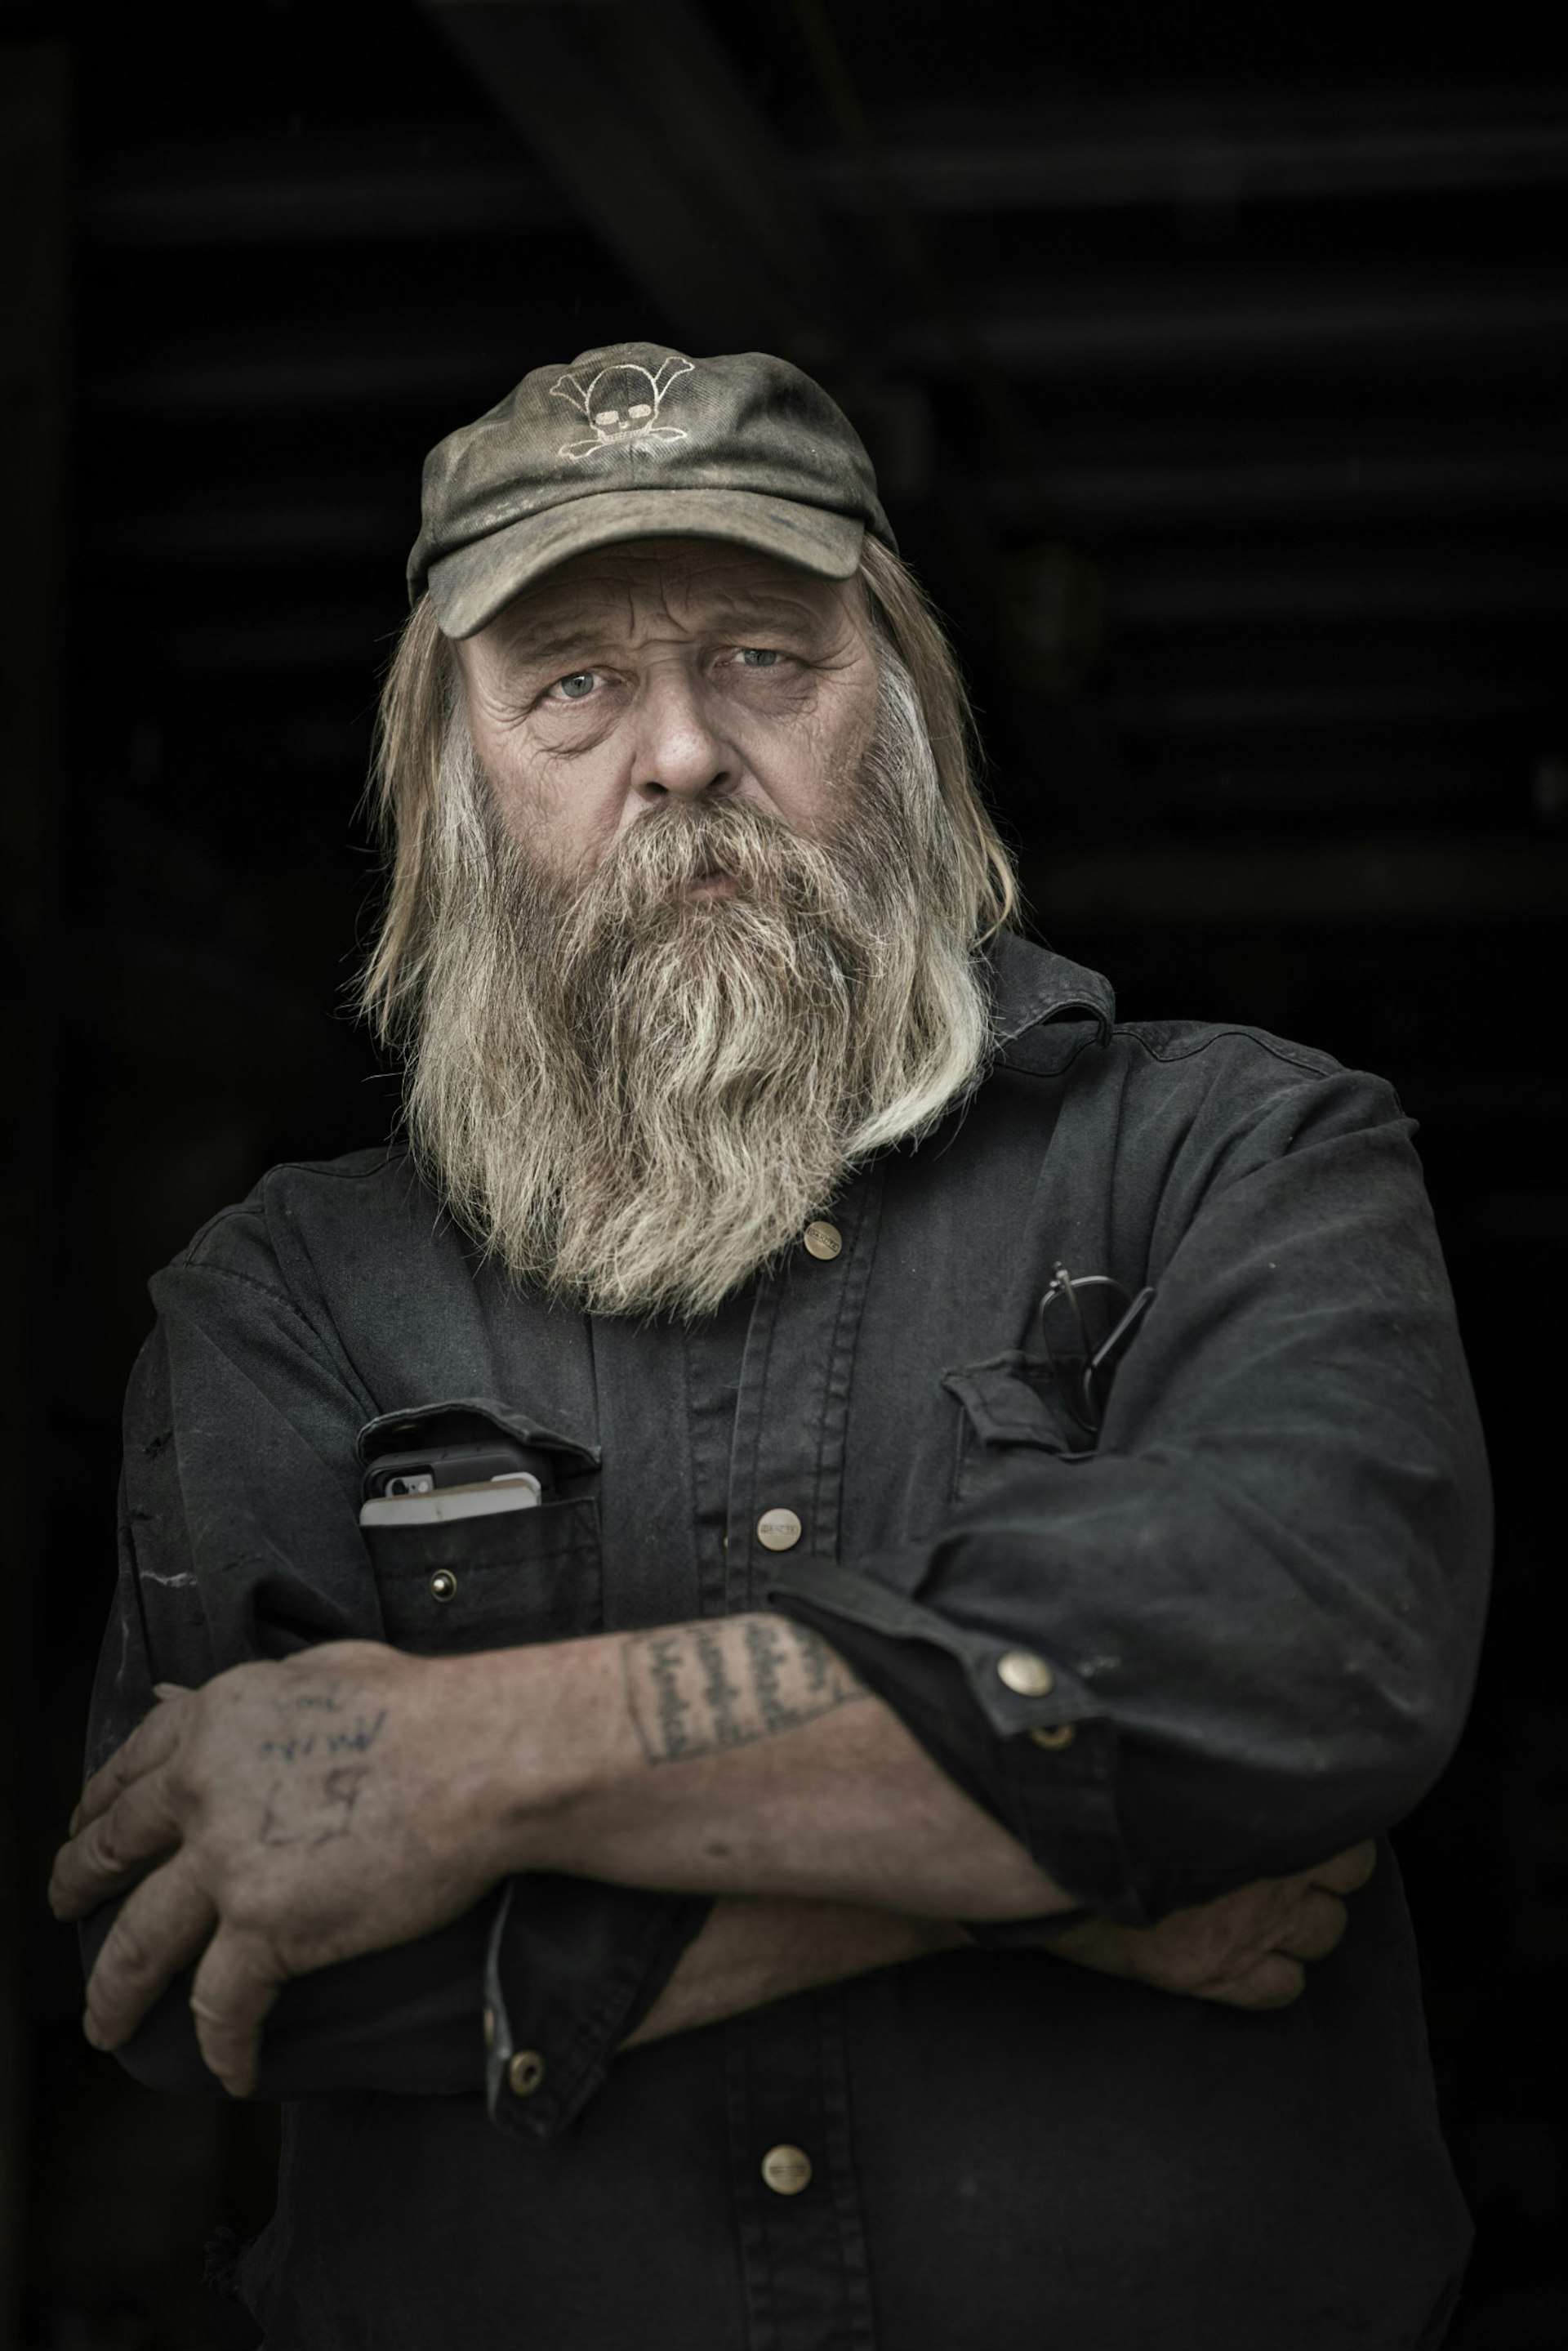 Tony Beets has been mining gold in the Yukon since 1982, and his net worth is estimated at over $5 million. © Justin Foulkes / Lonely Planet